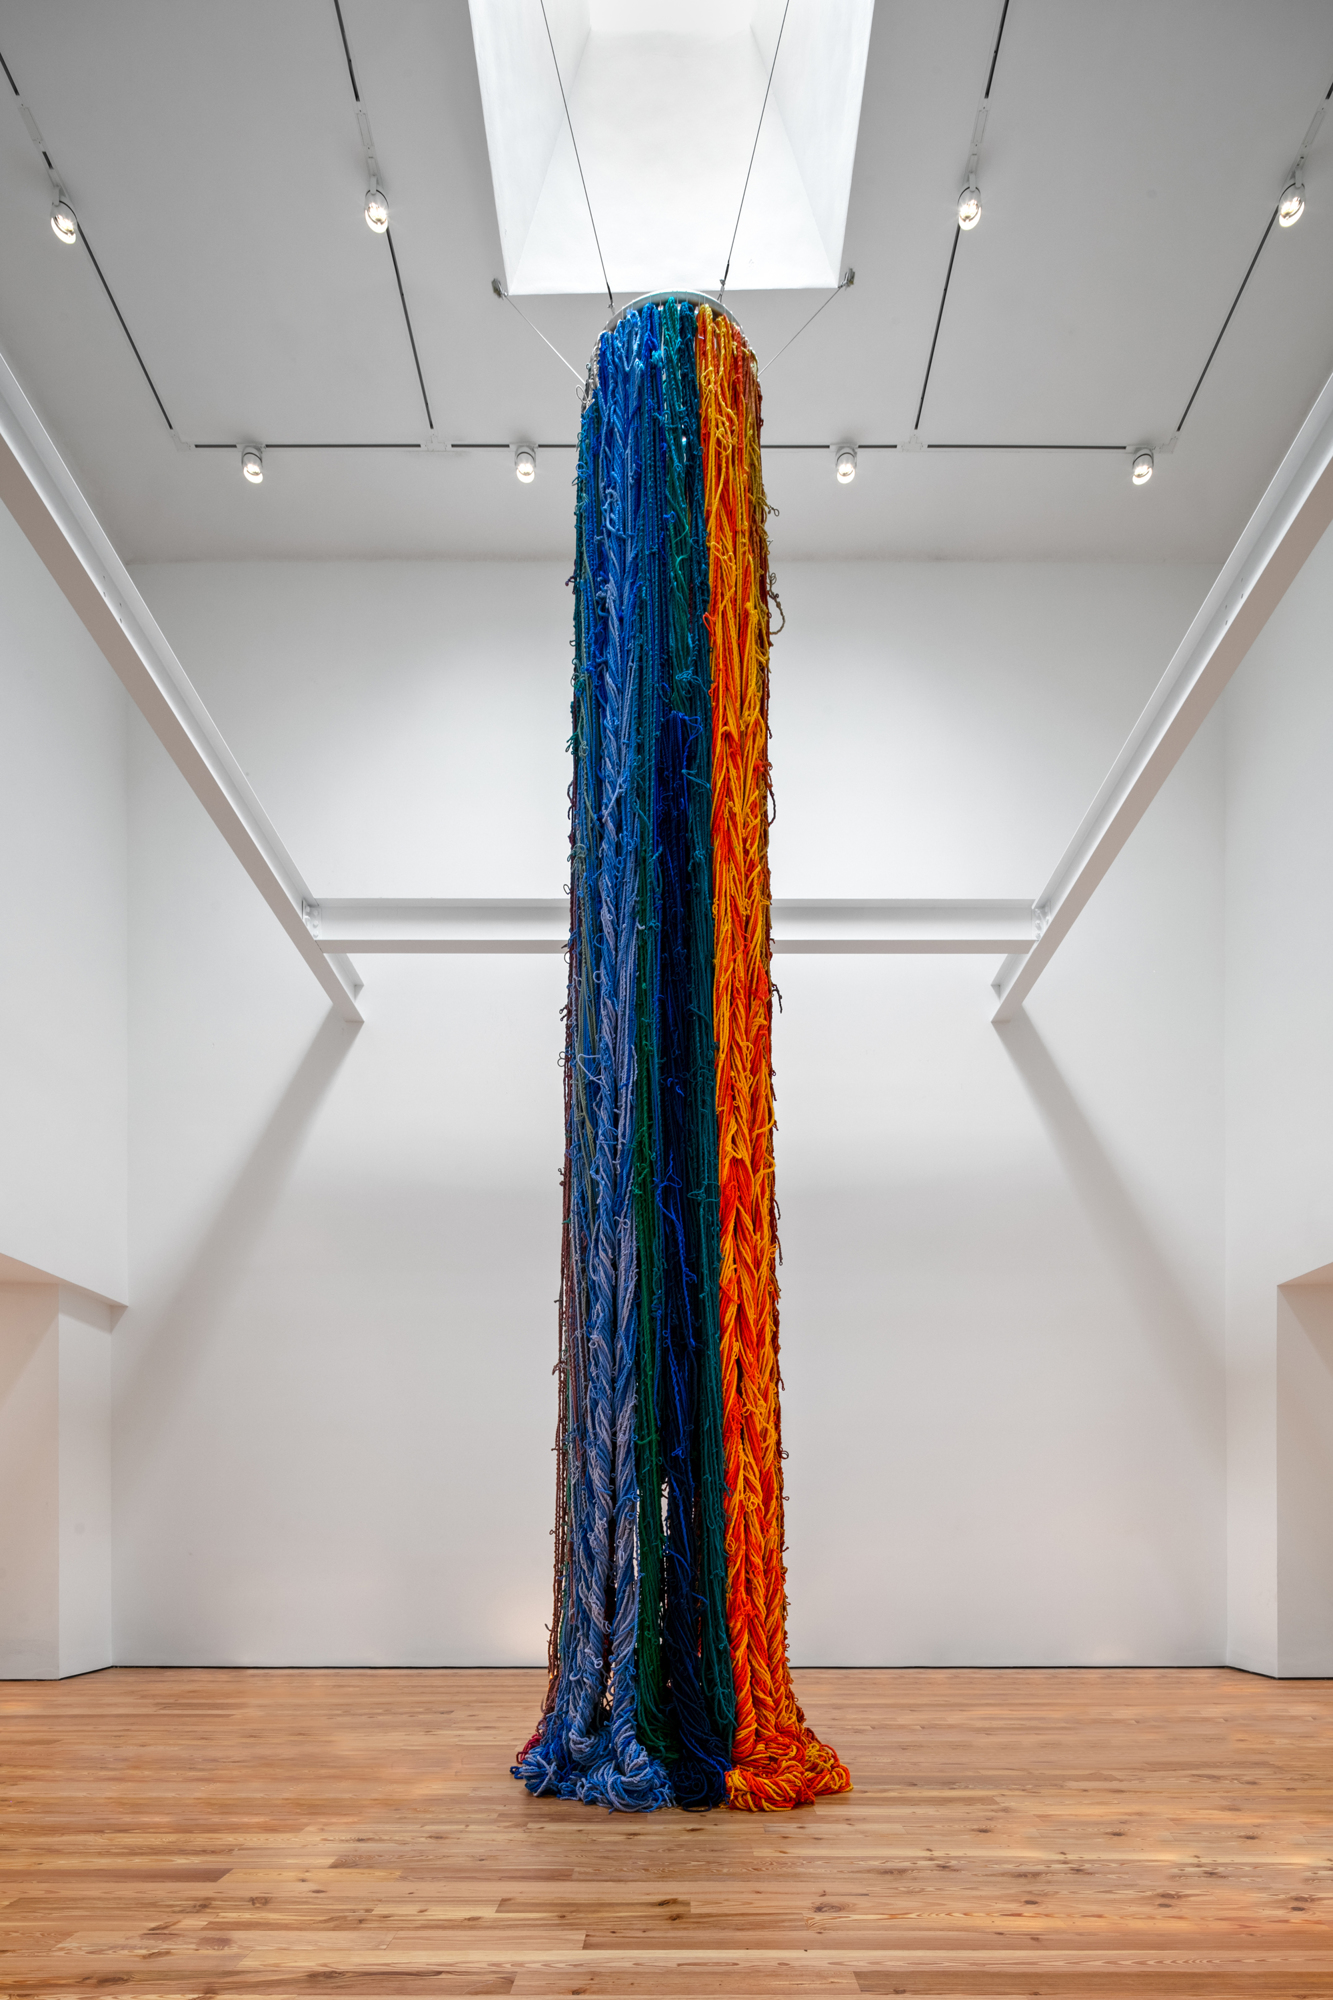 An installation by Sheila Hicks awaits wide-eye viewers in the Tom and Sherri Koski Gallery of the soon-to-open Sarasota Art Museum. (Courtesy Ryan Gamma)